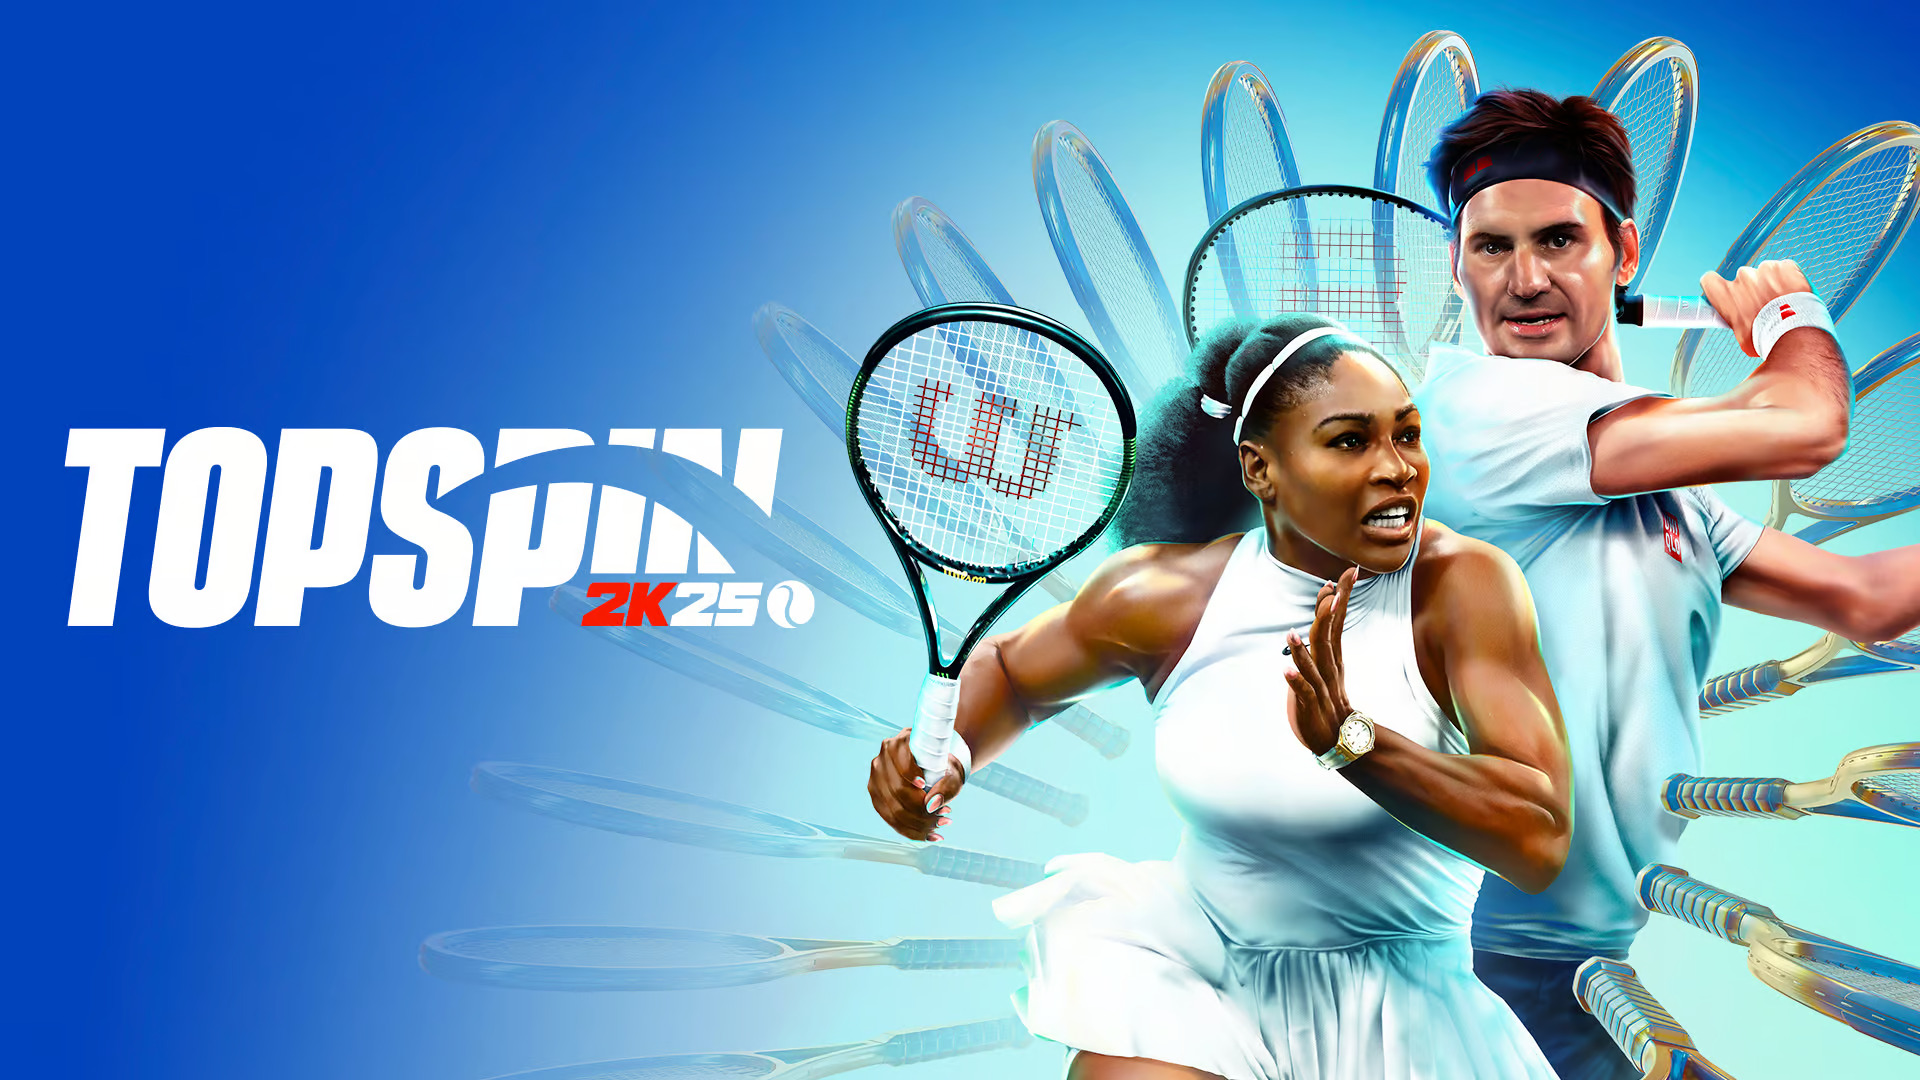 “RALLY ON” In TopSpin 2K25 – Now Available in Australia and New Zealand